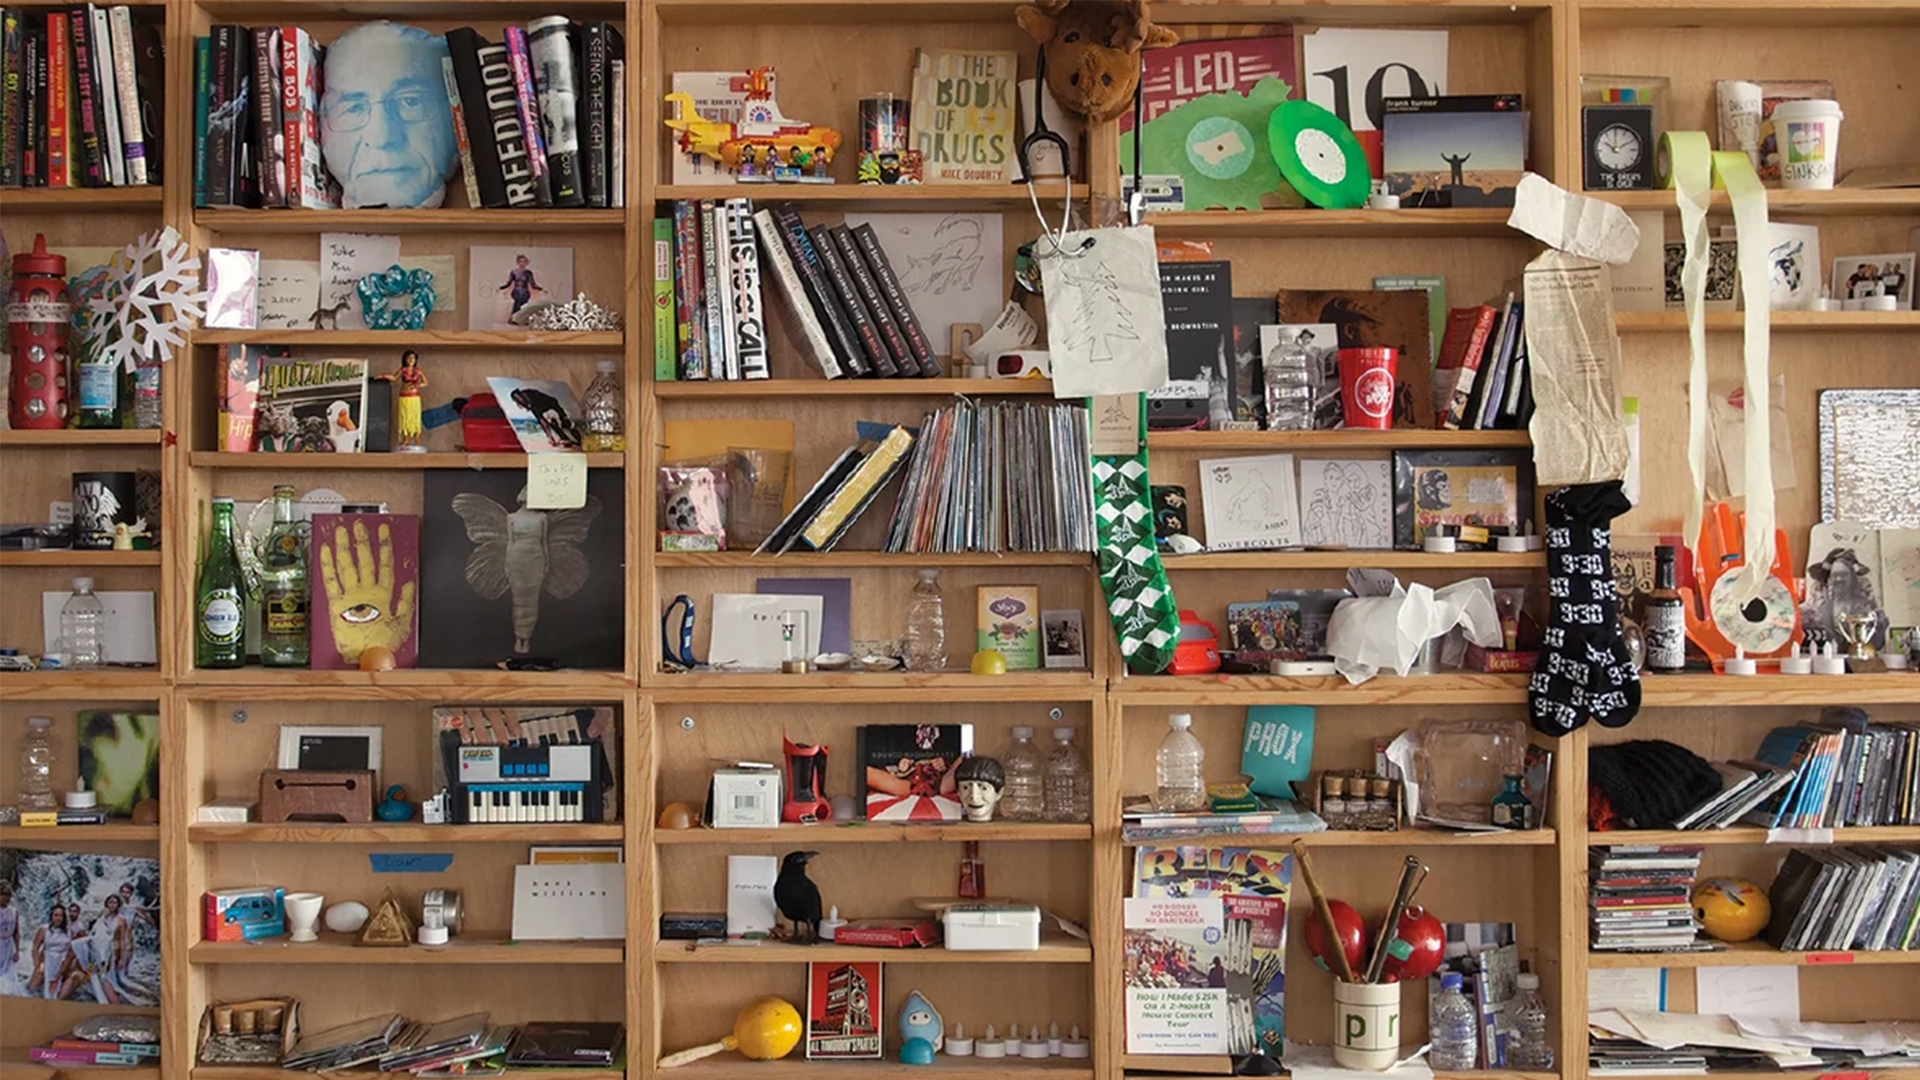 The bric-a-brac-stacked shelves of the Tiny Desk.